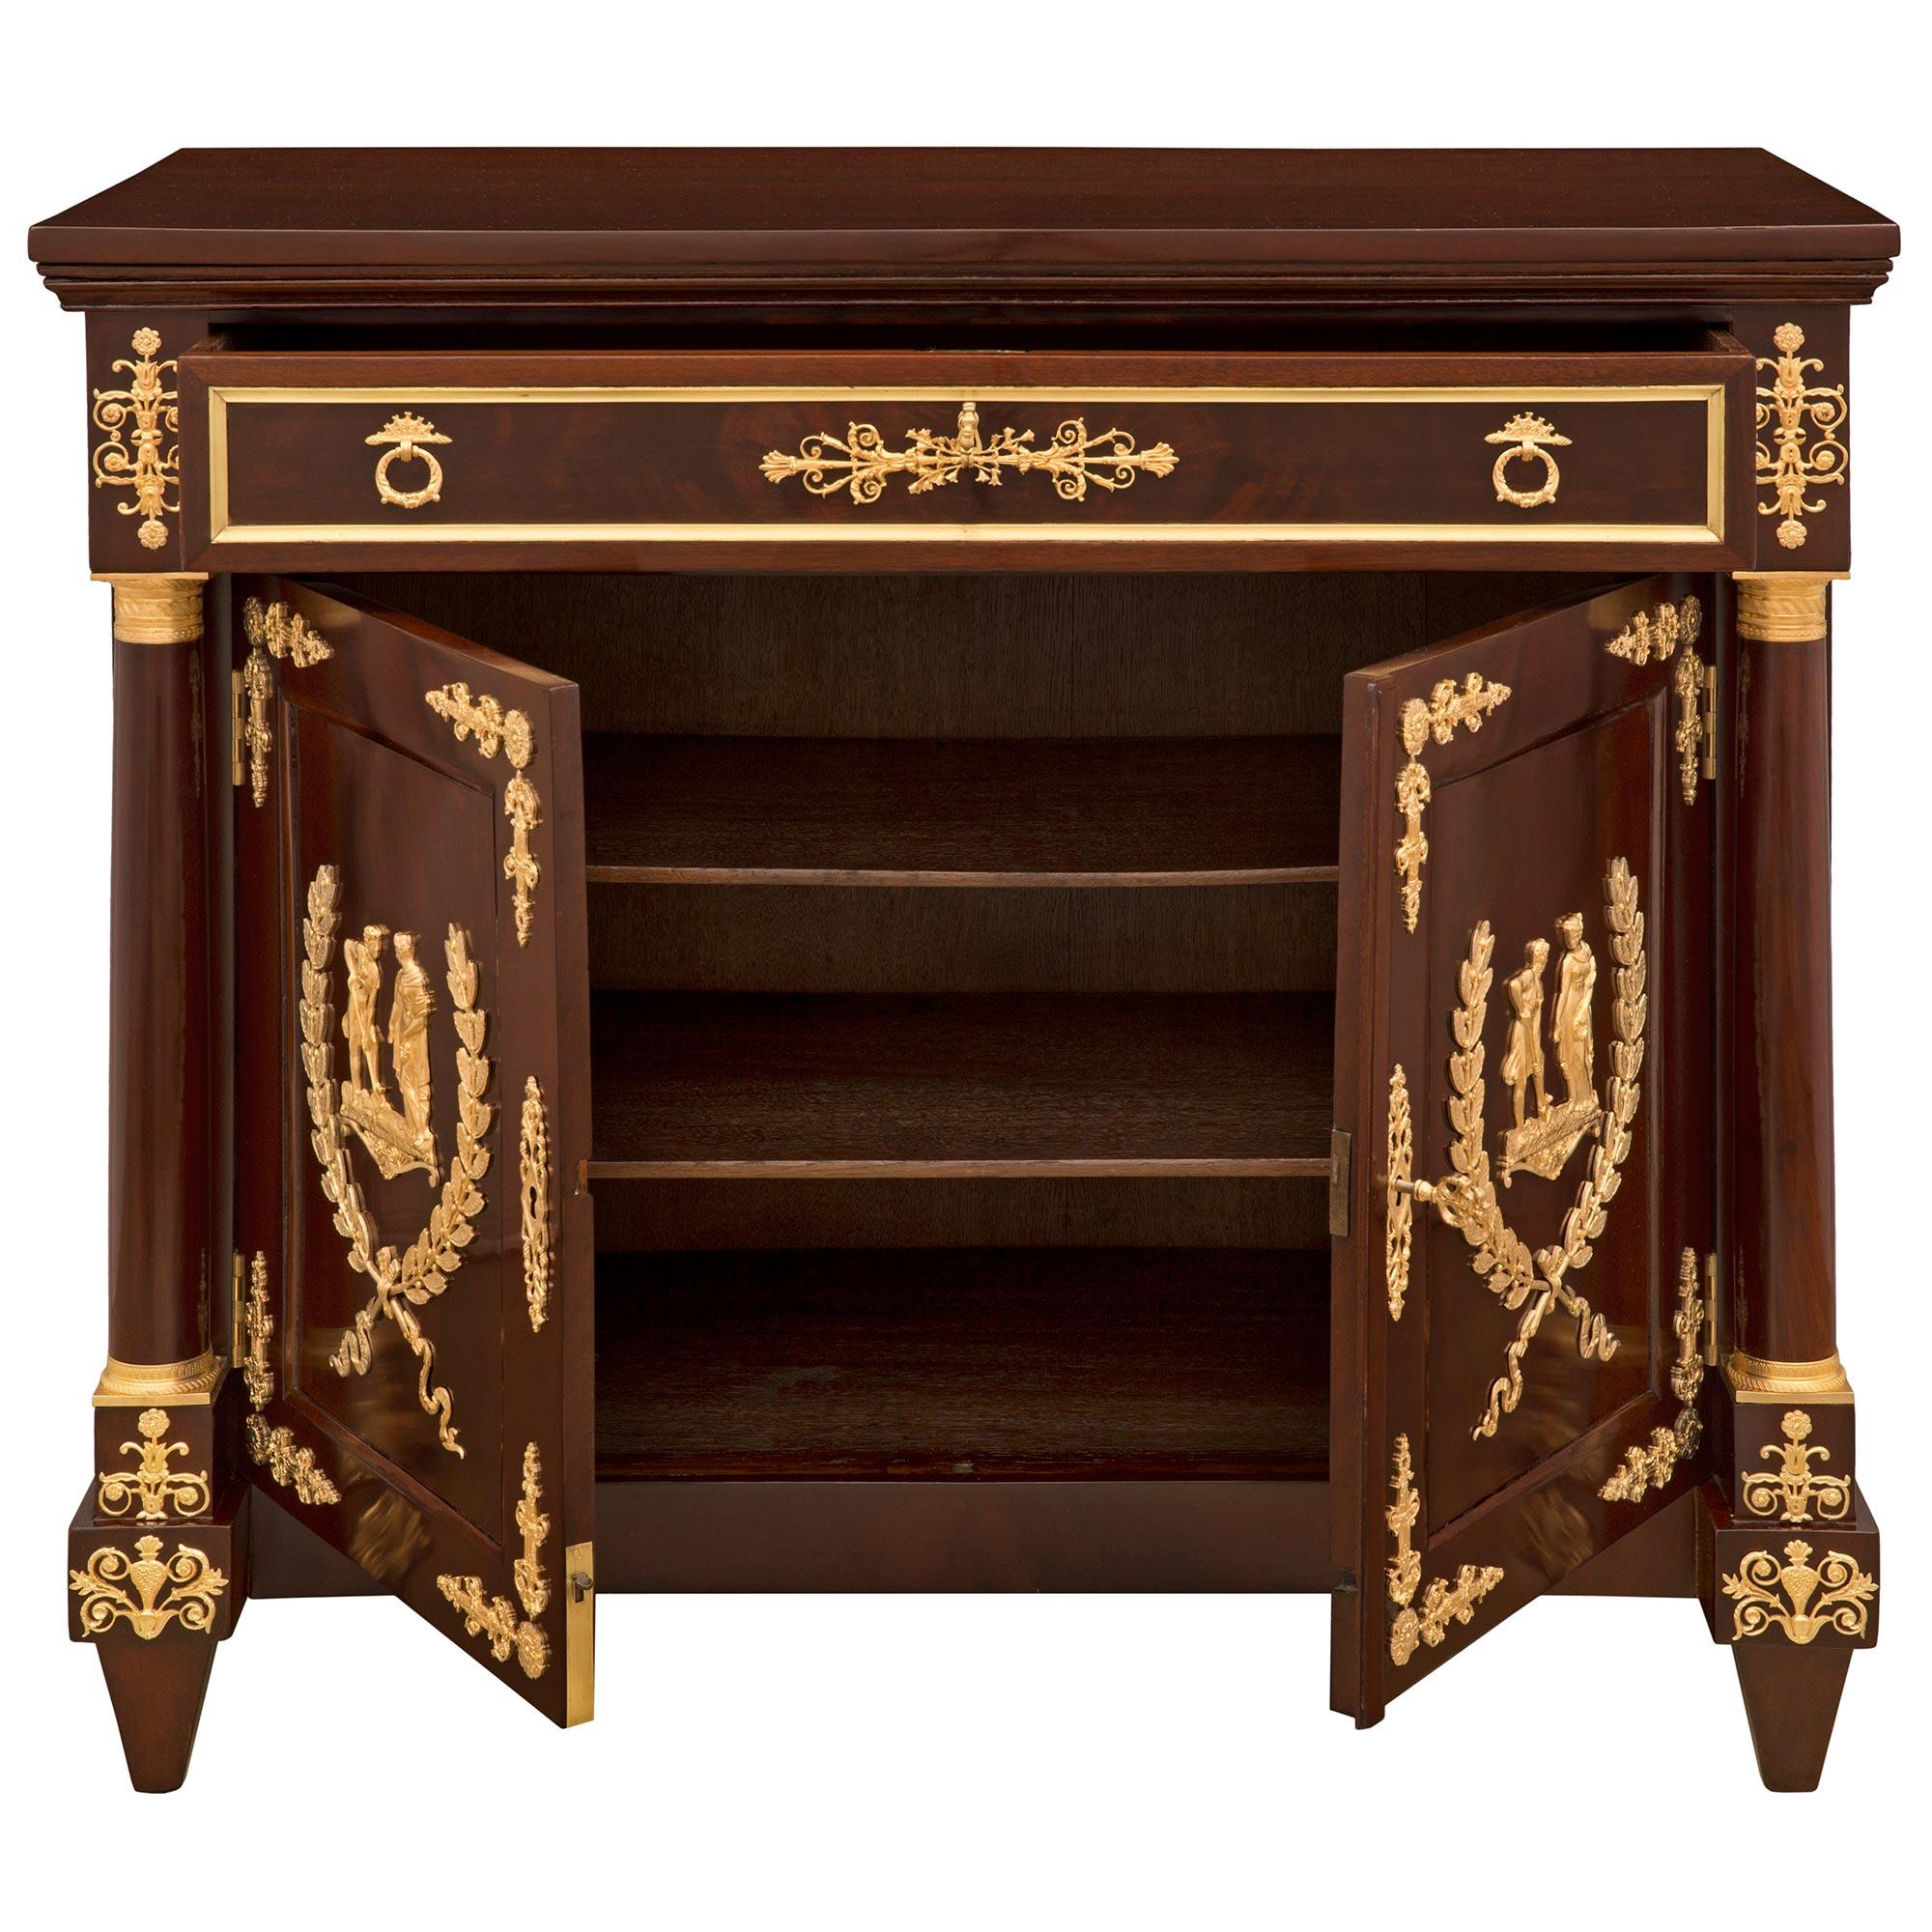 Neoclassical English 19th Century Neo-Classical St. Mahogany and Ormolu Buffet/Cabinet For Sale